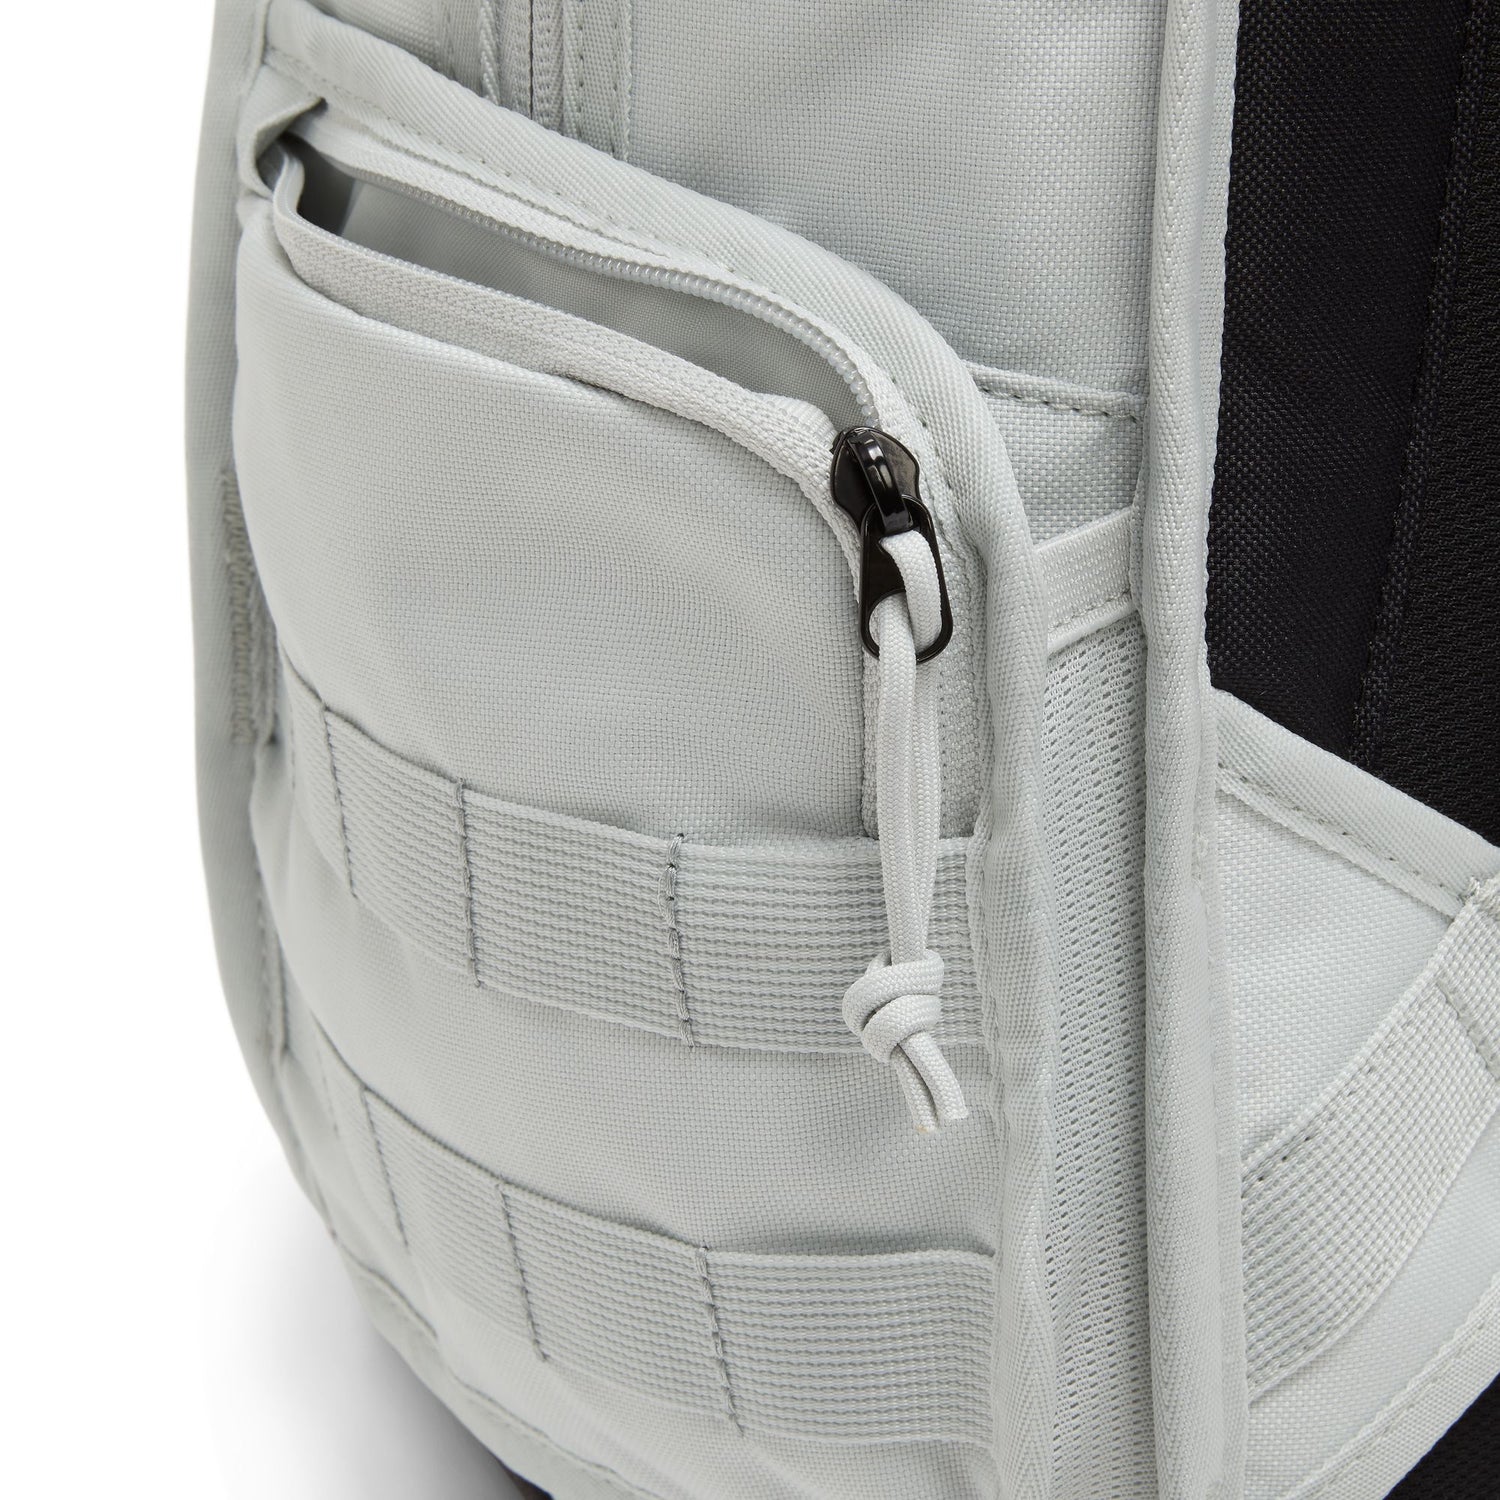 RPM BACKPACK LIGHT SILVER / BLACK / ANTHRACITE